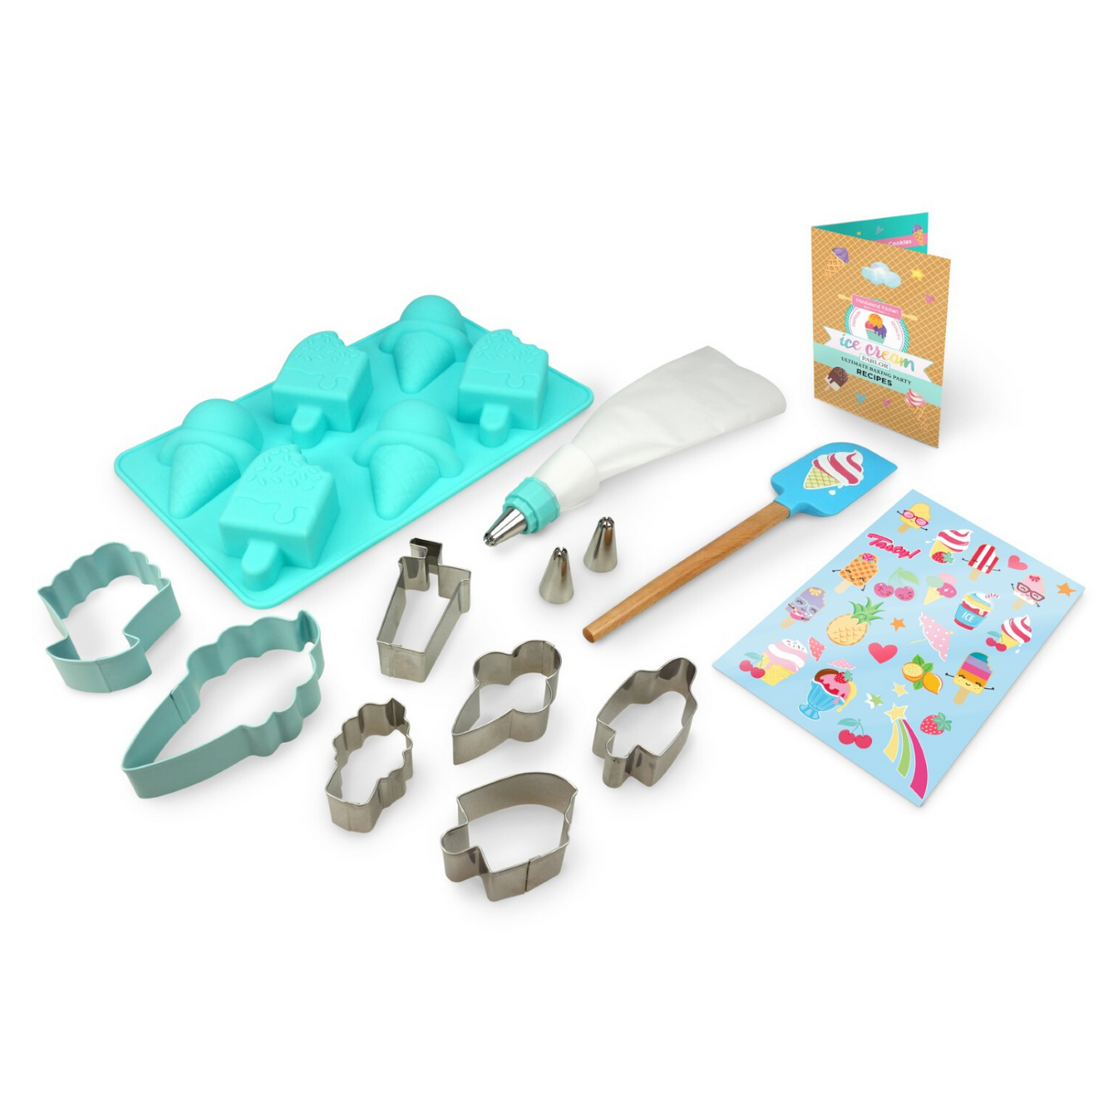 Out of box image of Ice Cream Parlor Ultimate Baking Party Set including:  1 ice cream cone and 1 sundae large stainless  steel cookie cutter, 5 ice cream-themed mini stainless steel  cookie cutters, 1 ice cream silicone mold, 1 silicone spatula,  1 frosting bag with coupler, ring and 3 tips, a sticker sheet  and recipes. 